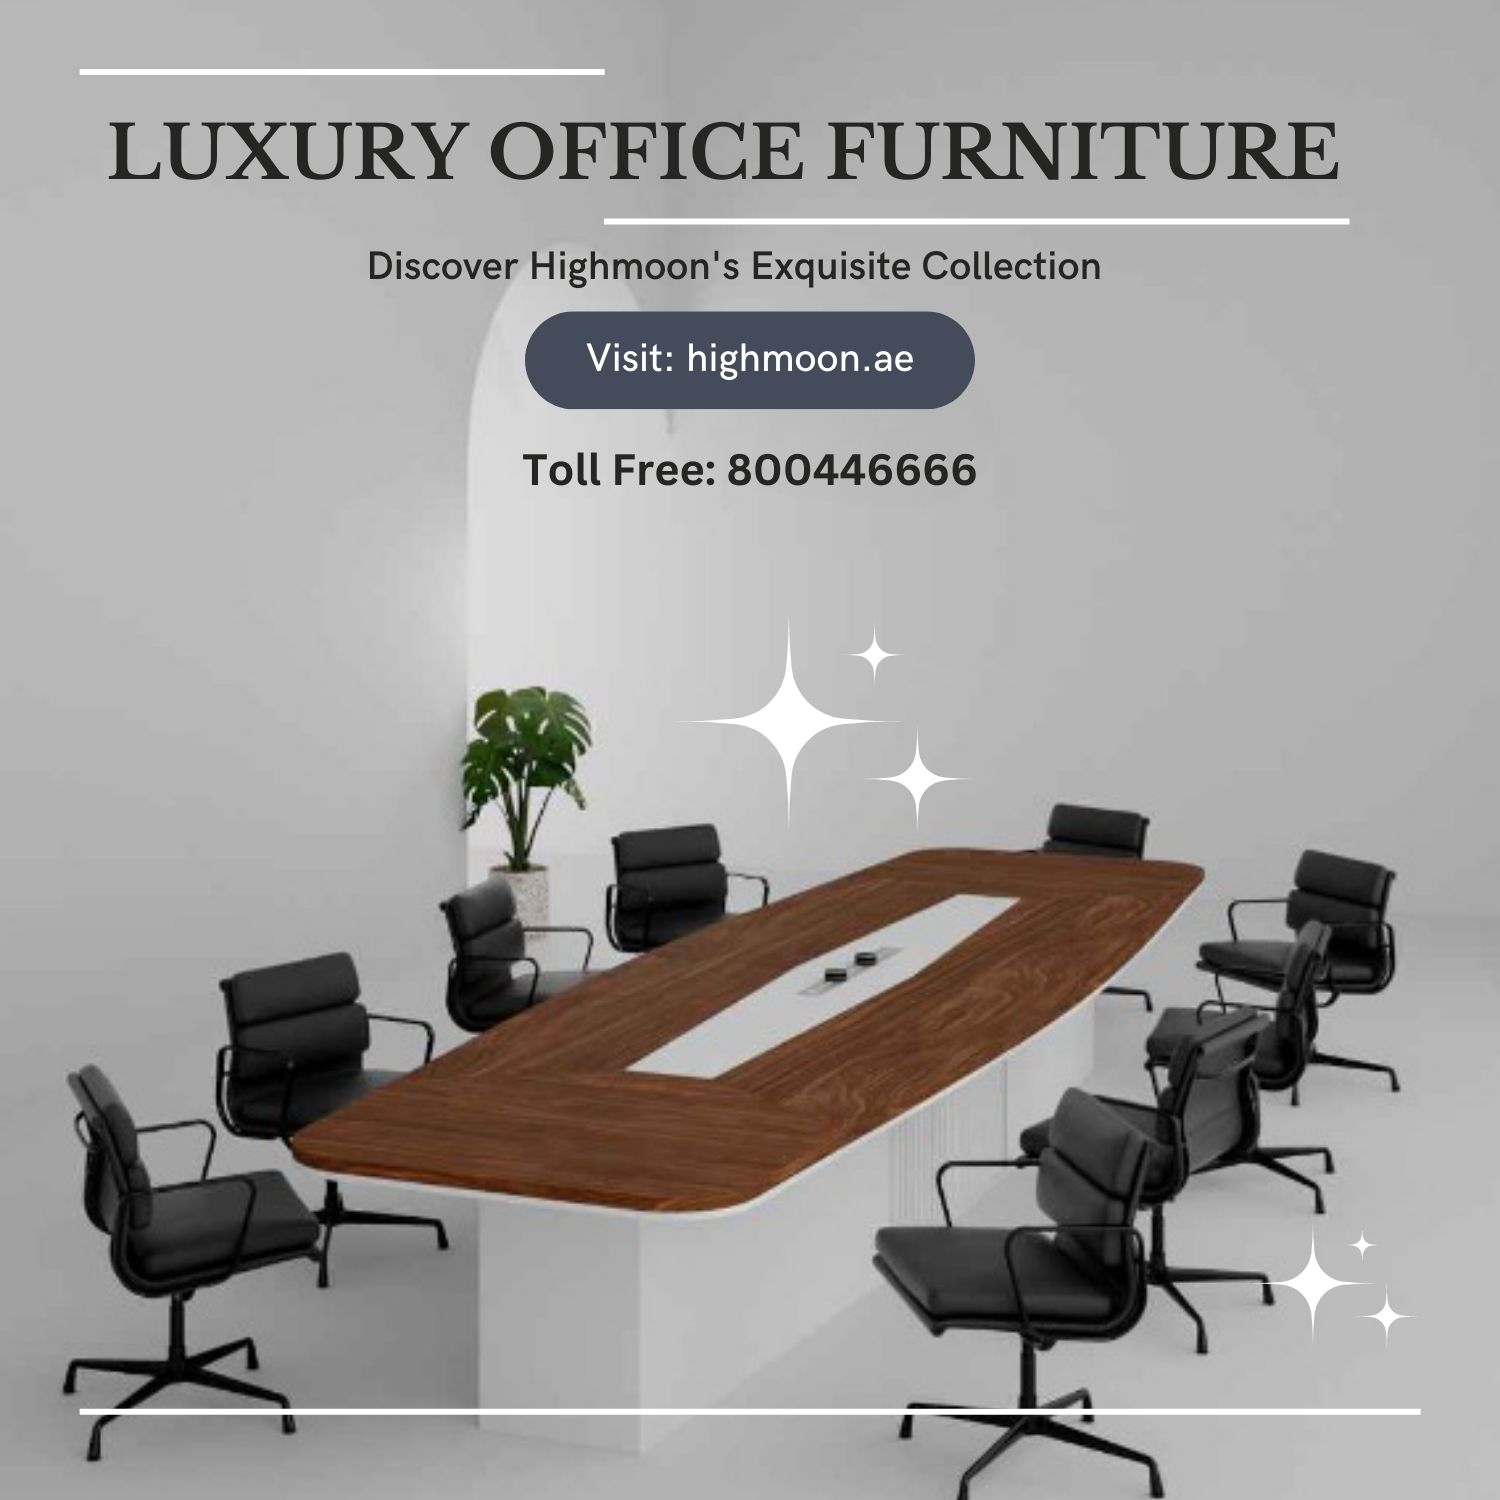 Luxury Office Furniture Dubai Discover Highmoon S Exquisite Collection